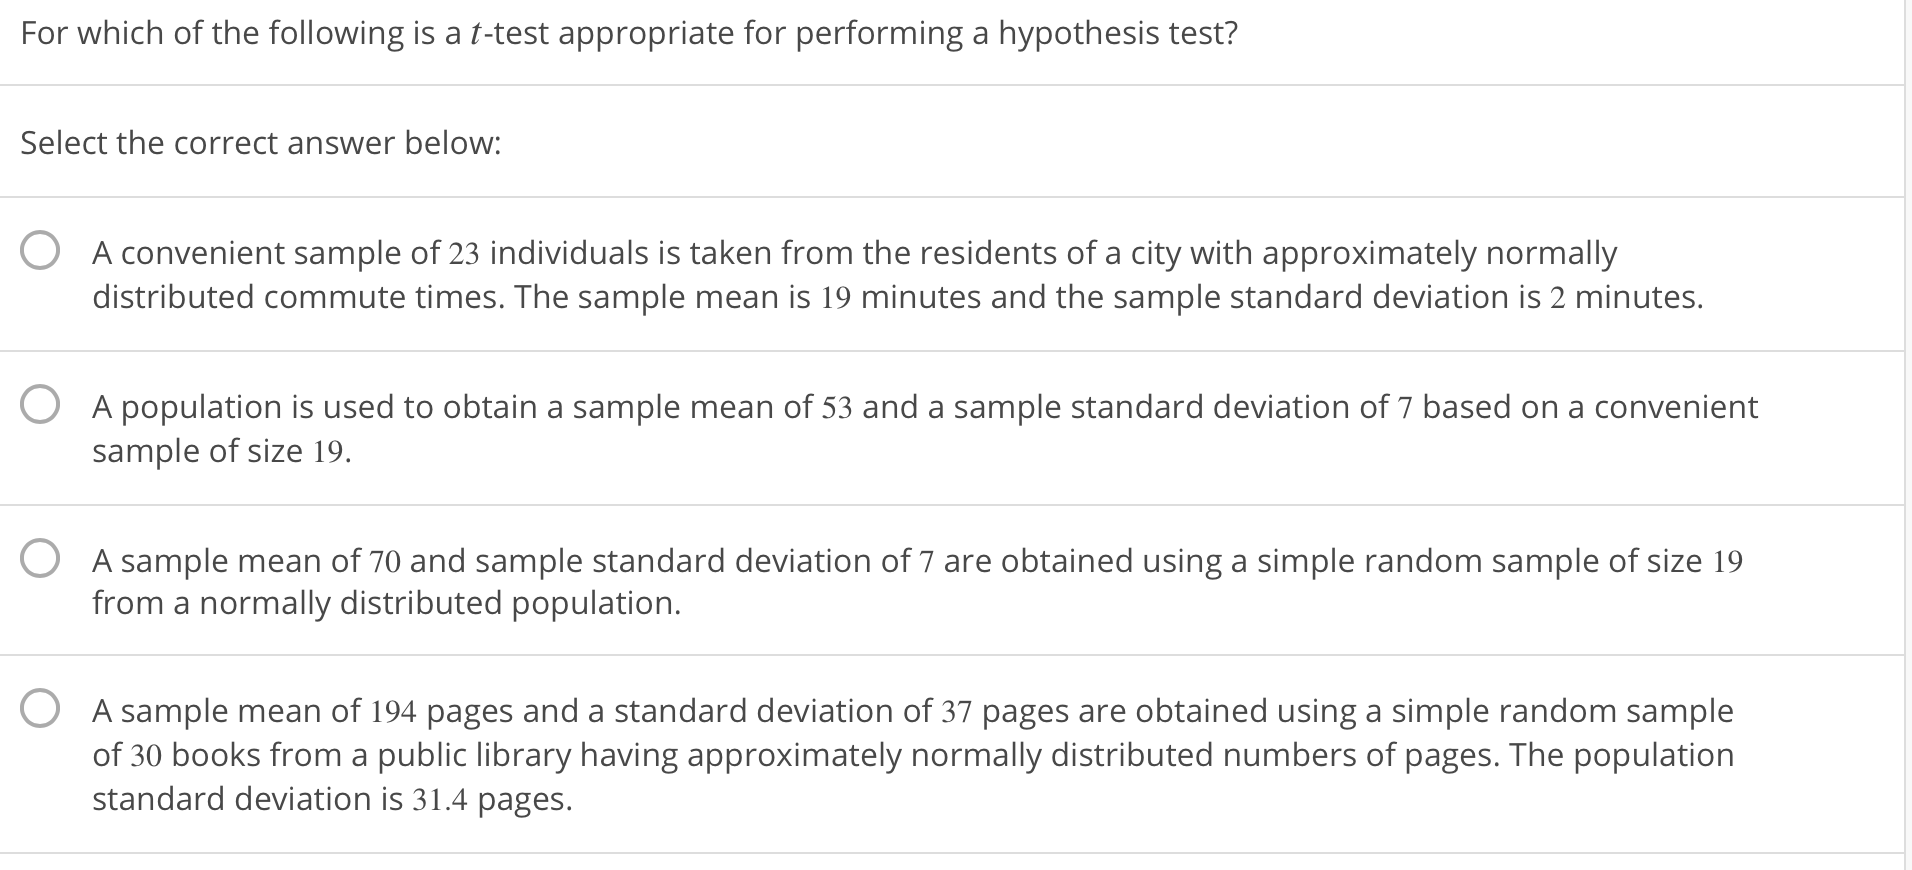 For which of the following is a t-test appropriate for performing a hypothesis test?
Select the correct answer below:
O
A convenient sample of 23 individuals is taken from the residents of a city with approximately normally
distributed commute times. The sample mean is 19 minutes and the sample standard deviation is 2 minutes.
O
A population is used to obtain a sample mean of 53 and a sample standard deviation of 7 based on a convenient
sample of size 19.
O
A sample mean of 70 and sample standard deviation of 7 are obtained using a simple random sample of size 19
from a normally distributed population.
O
A sample mean of 194 pages and a standard deviation of 37 pages are obtained using a simple random sample
of 30 books from a public library having approximately normally distributed numbers of pages. The population
standard deviation is 31.4 pages.
